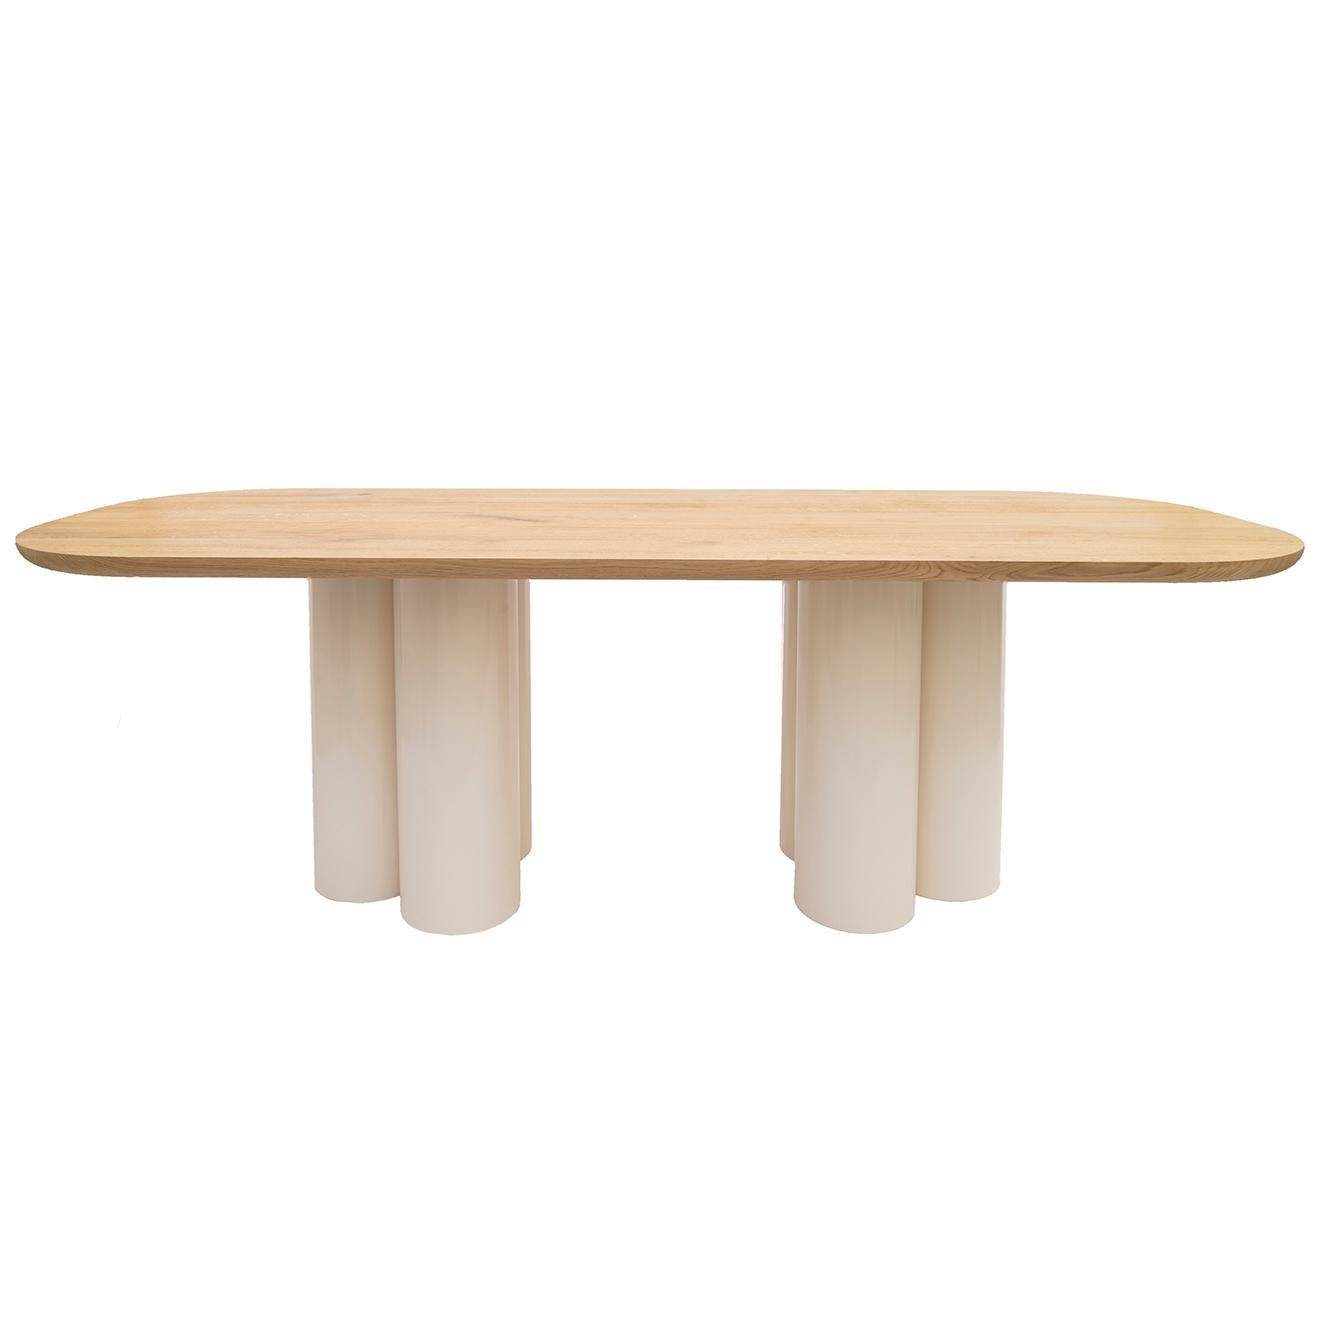 Polish Object 071 Table by NG Design For Sale